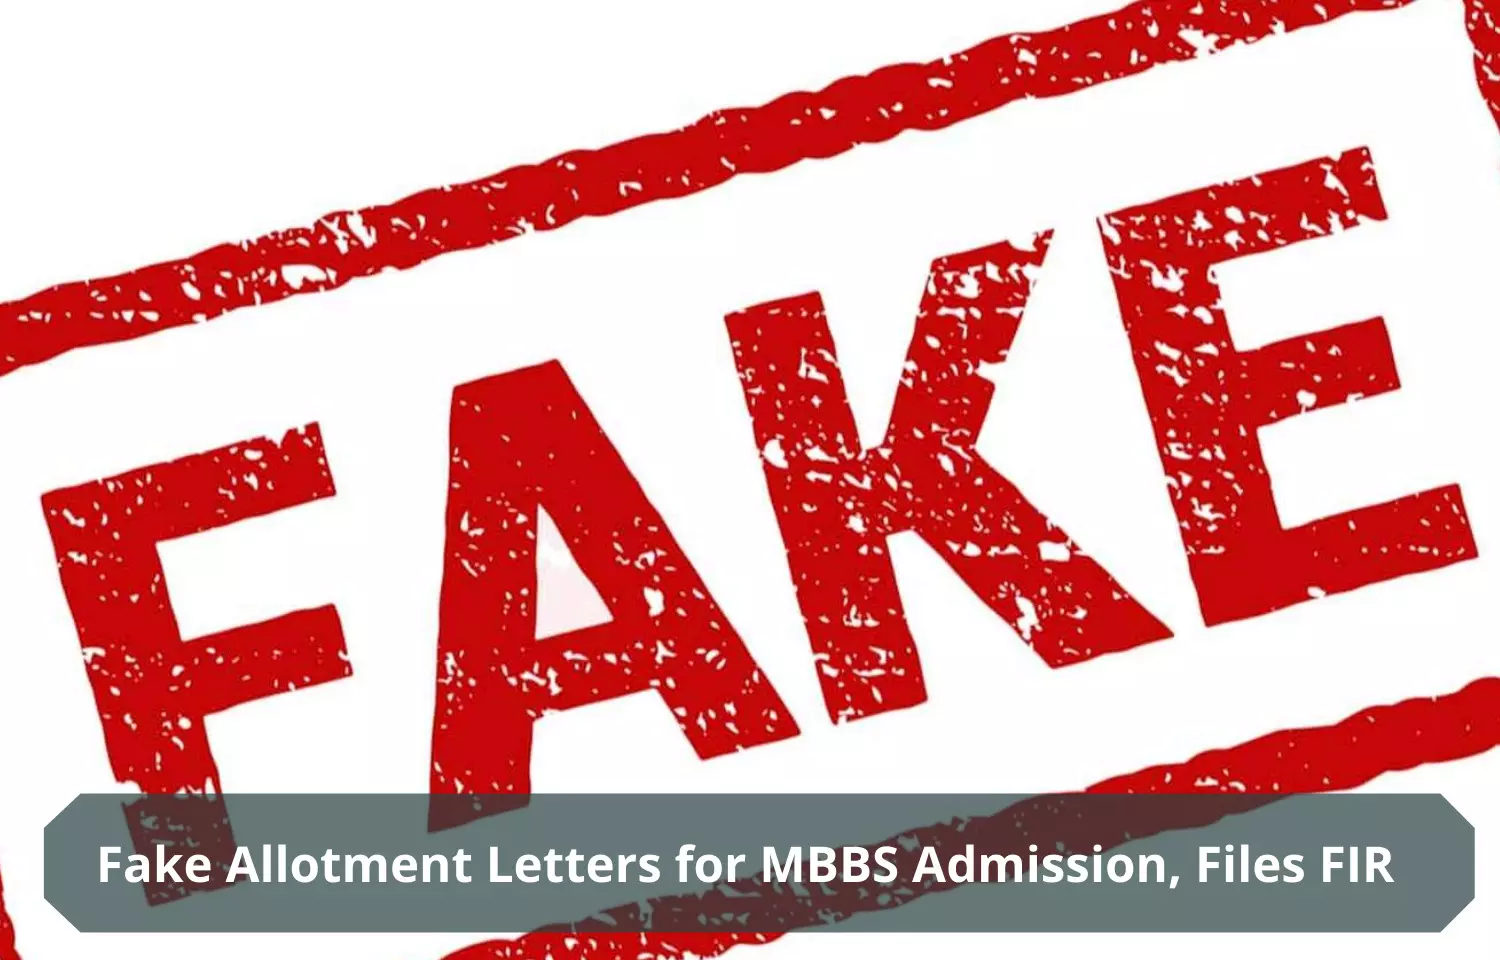 NMC warns against fake allotment letters for MBBS admission